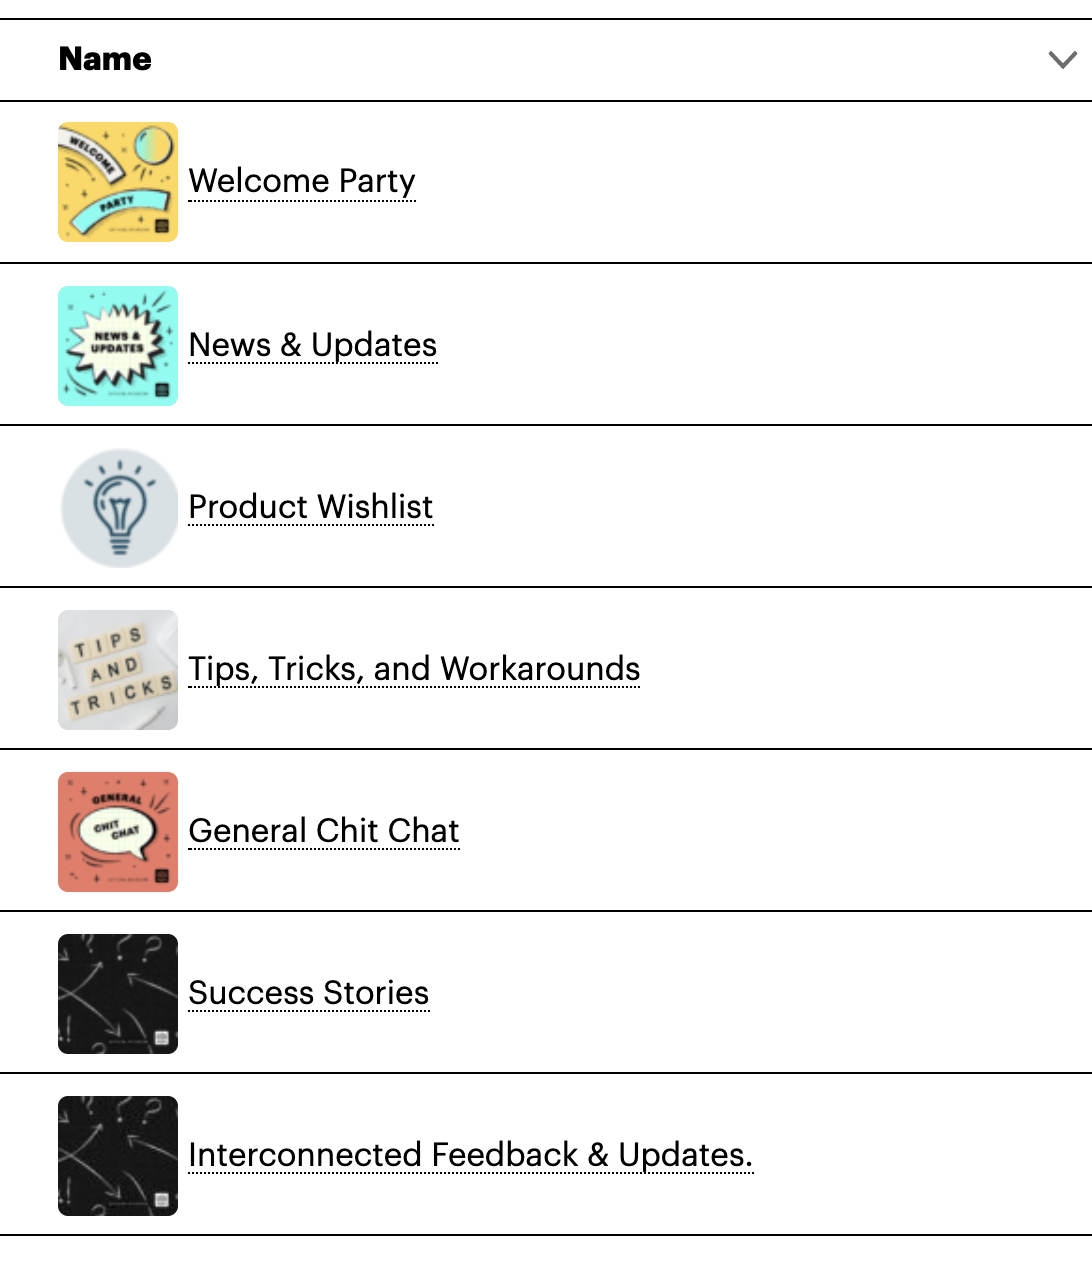 List of Interconnected Groups